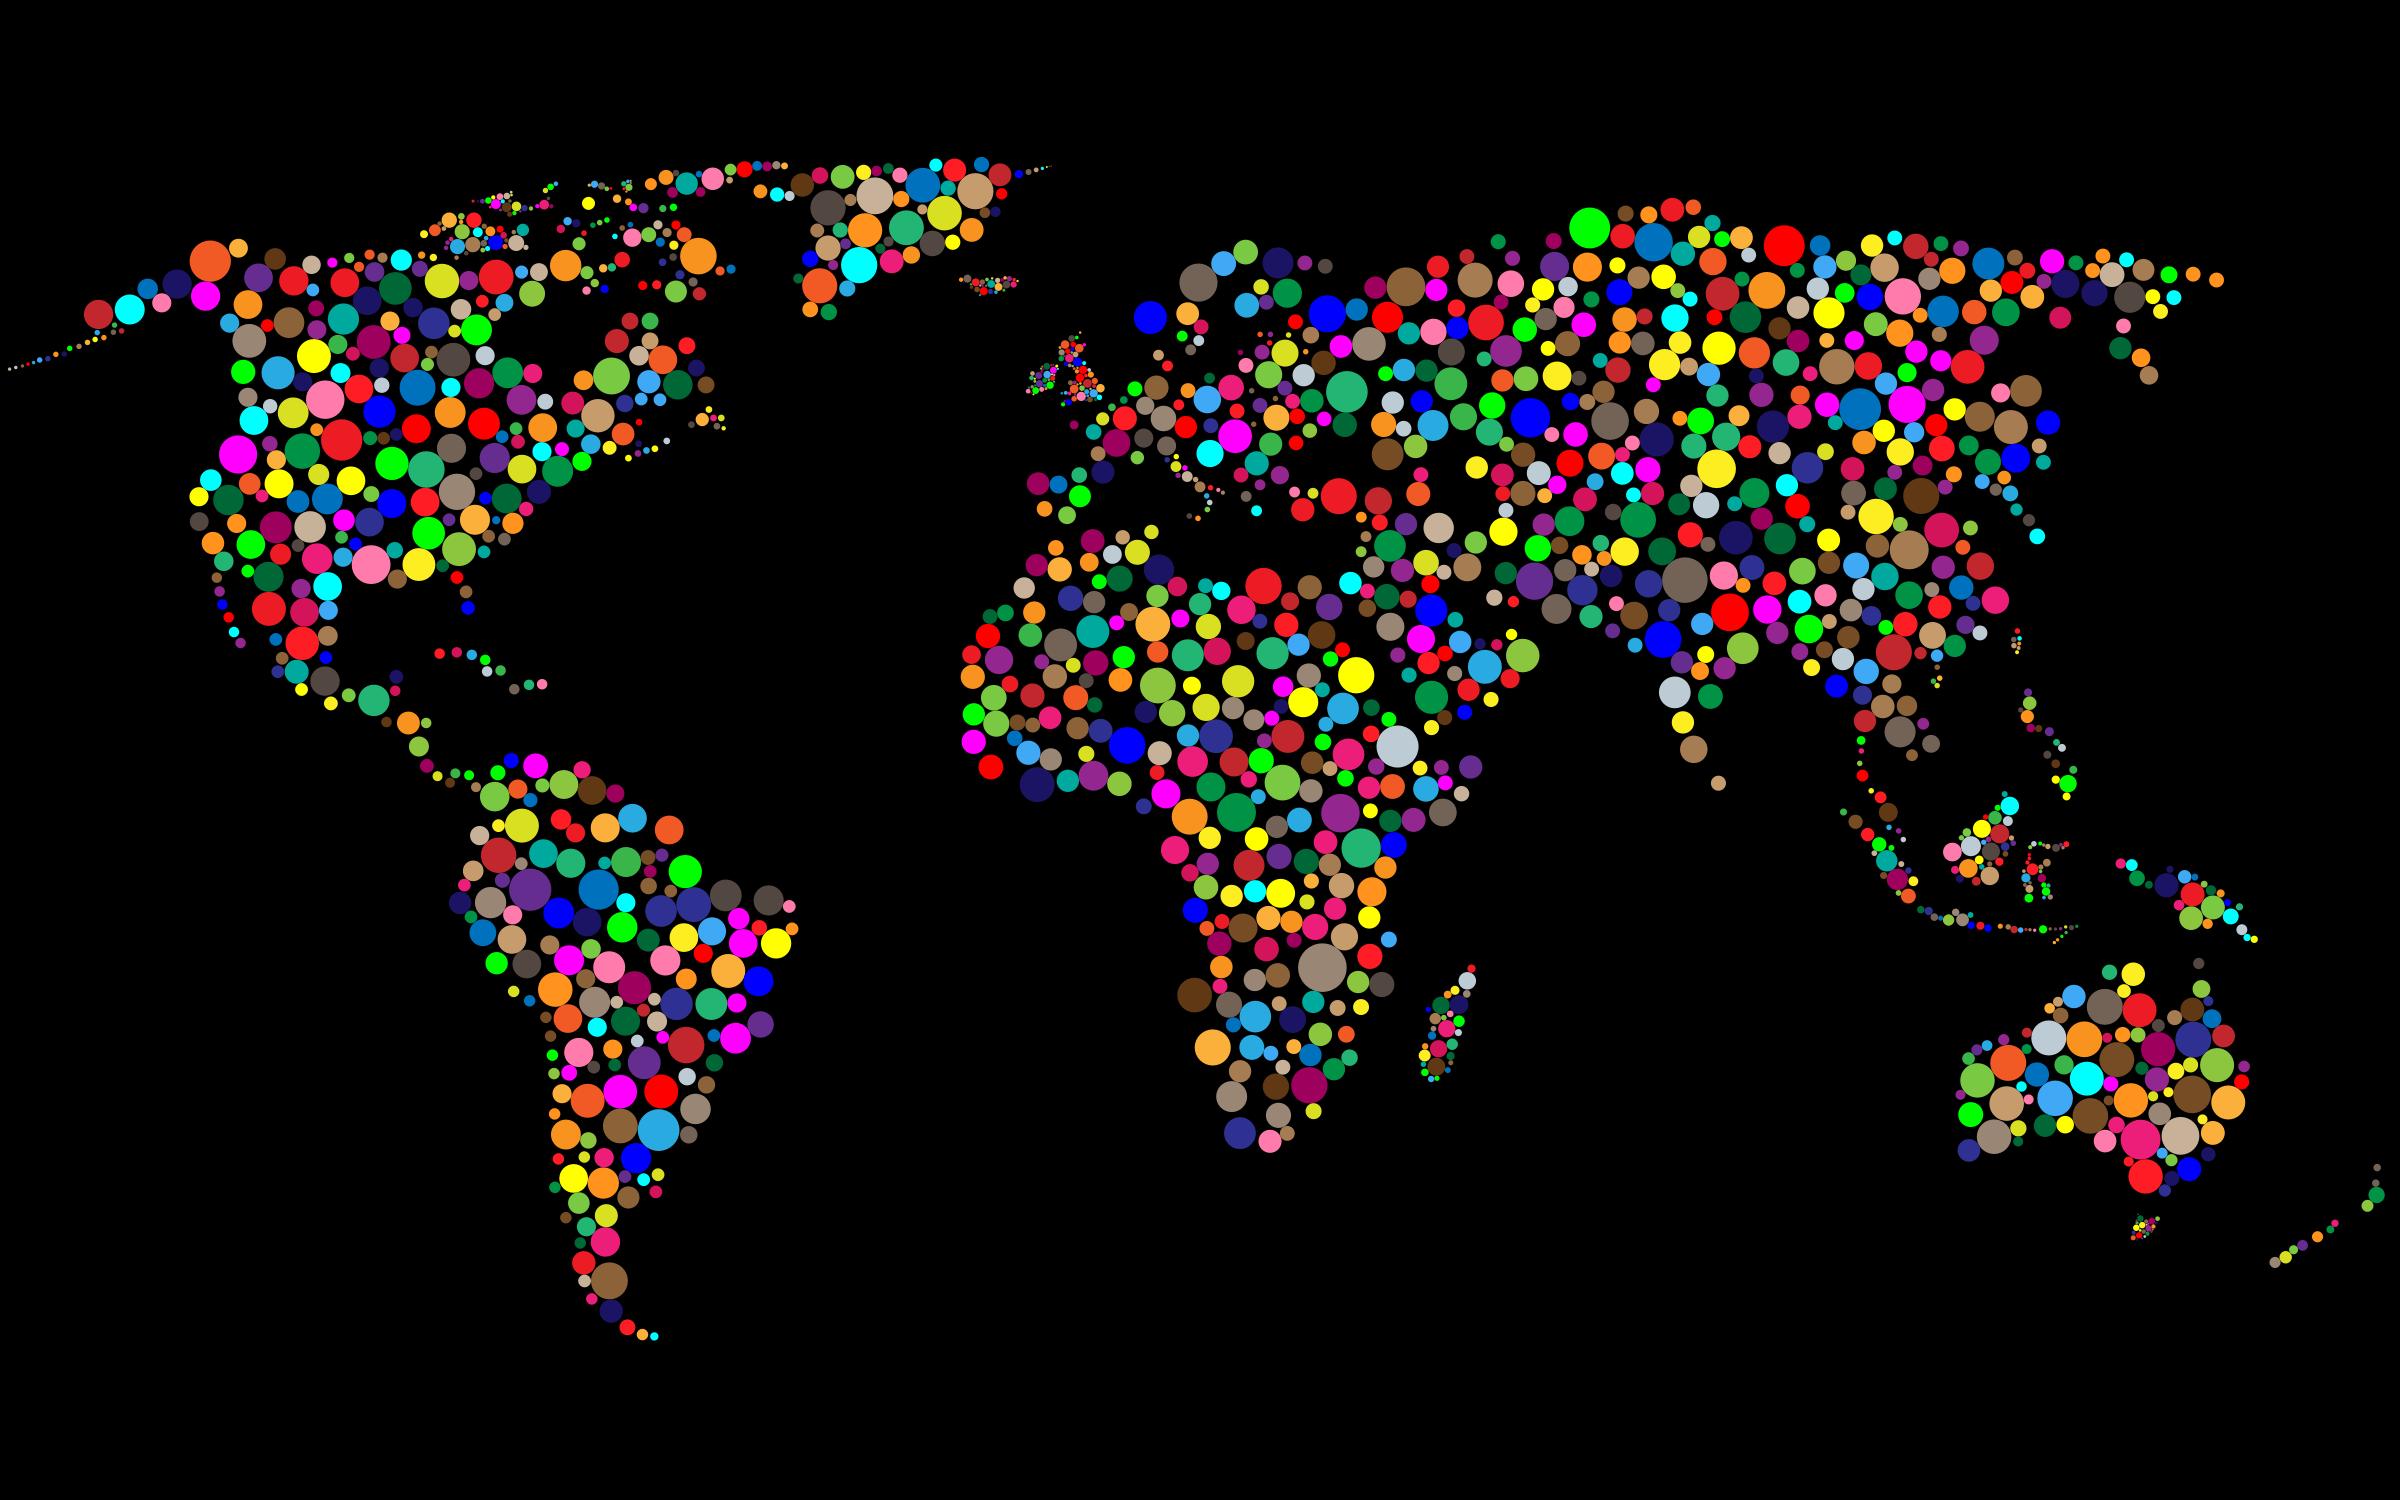 Colorful Circles World Map With Background 5 png